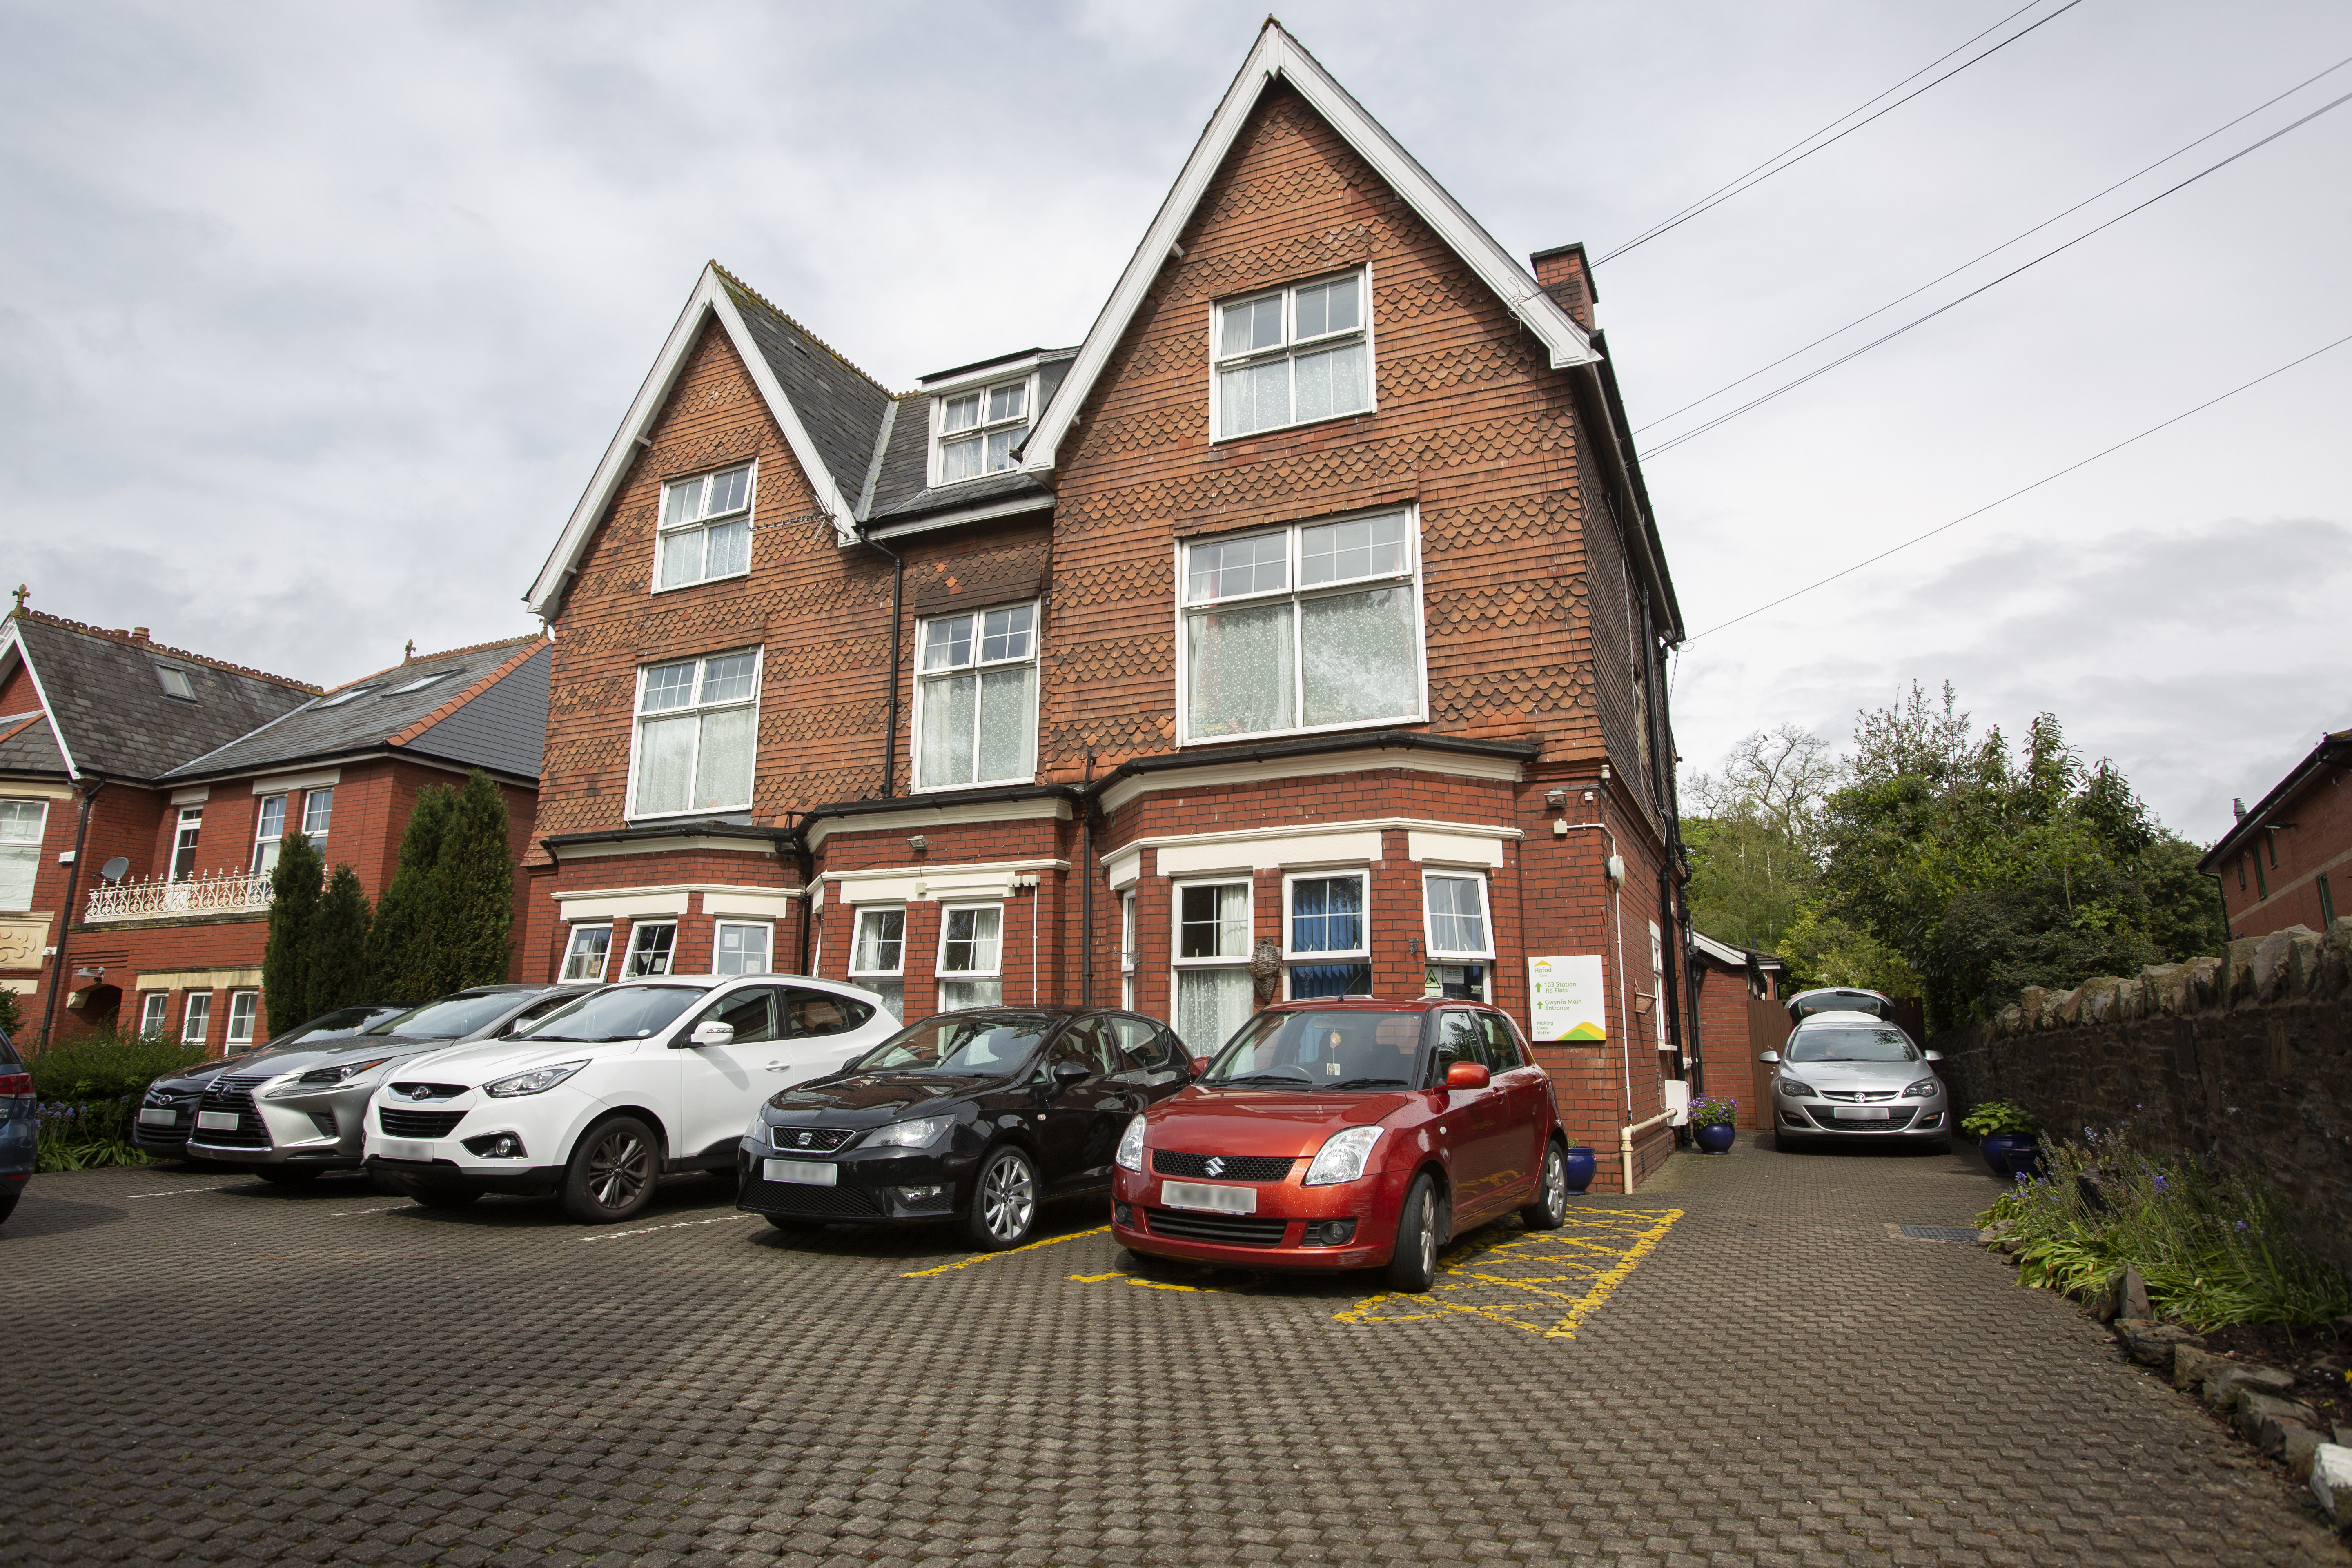 Exterior or Gwynfa Care Home in Cardiff